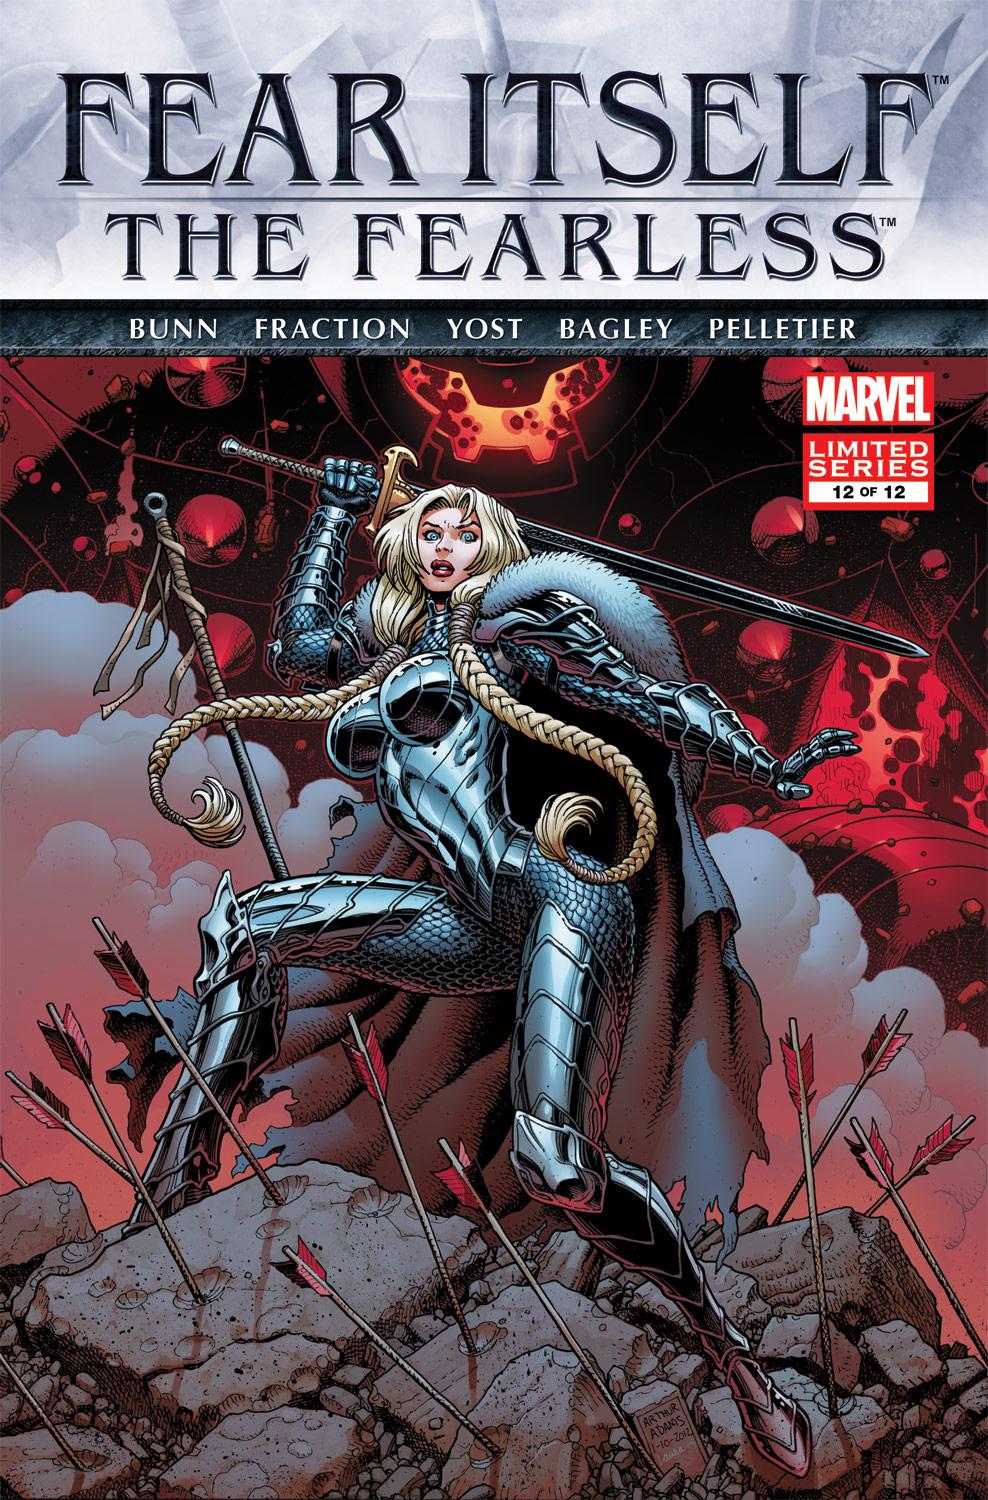 Marvel Fear Itself: The Fearless #5 Comic Book of 12 